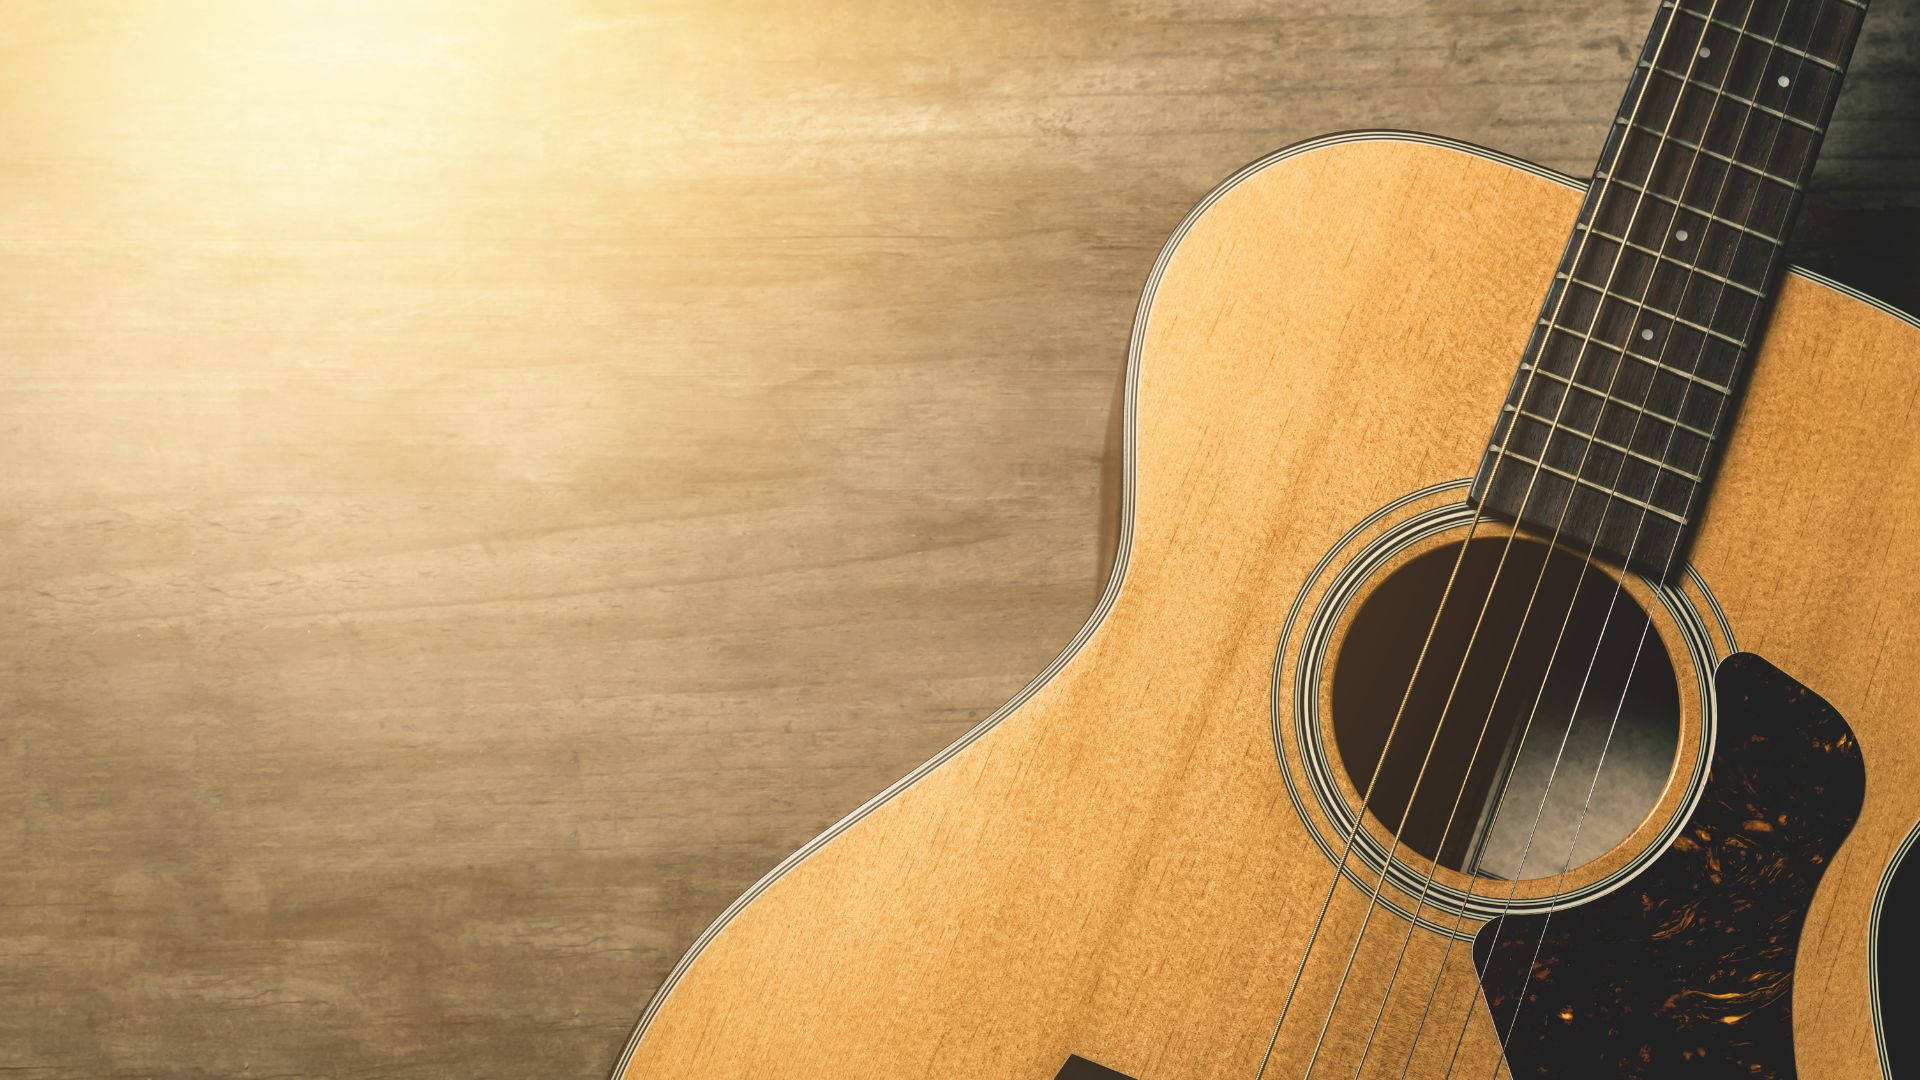 Acoustic Guitar Shiny Background Wallpaper